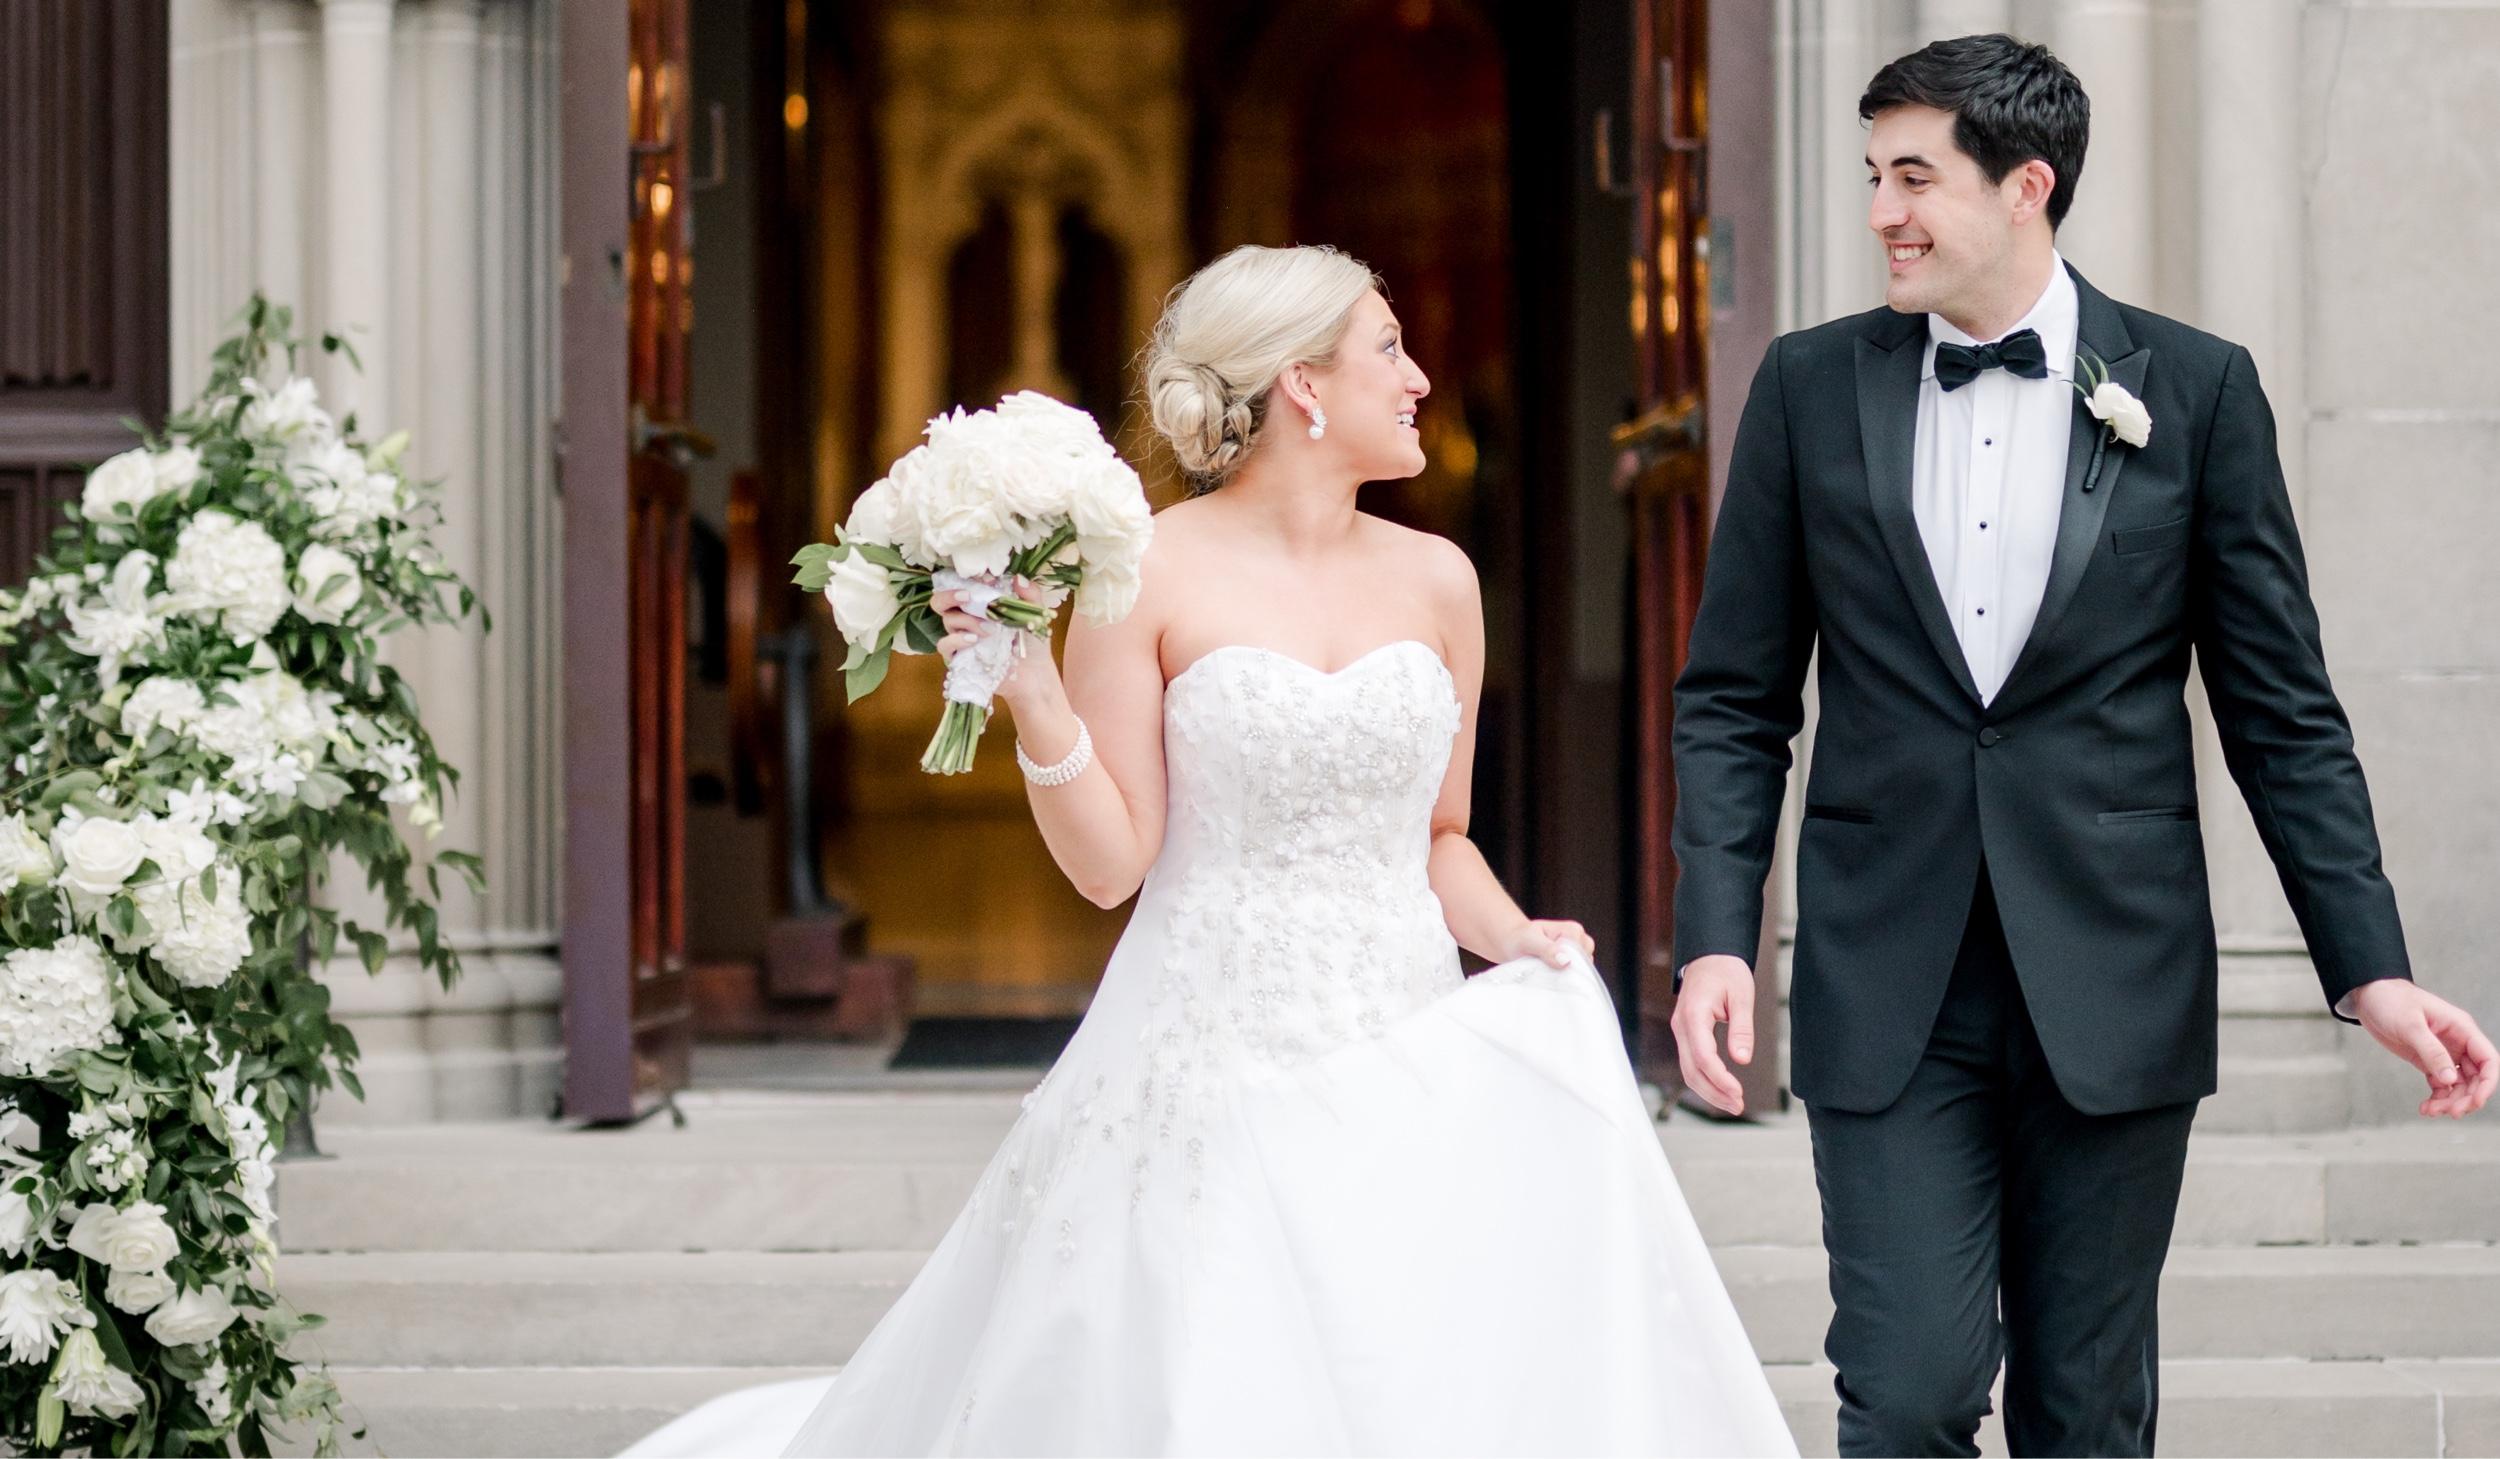 The Wedding Website of Allyson Lacoste and Jack Carvalho